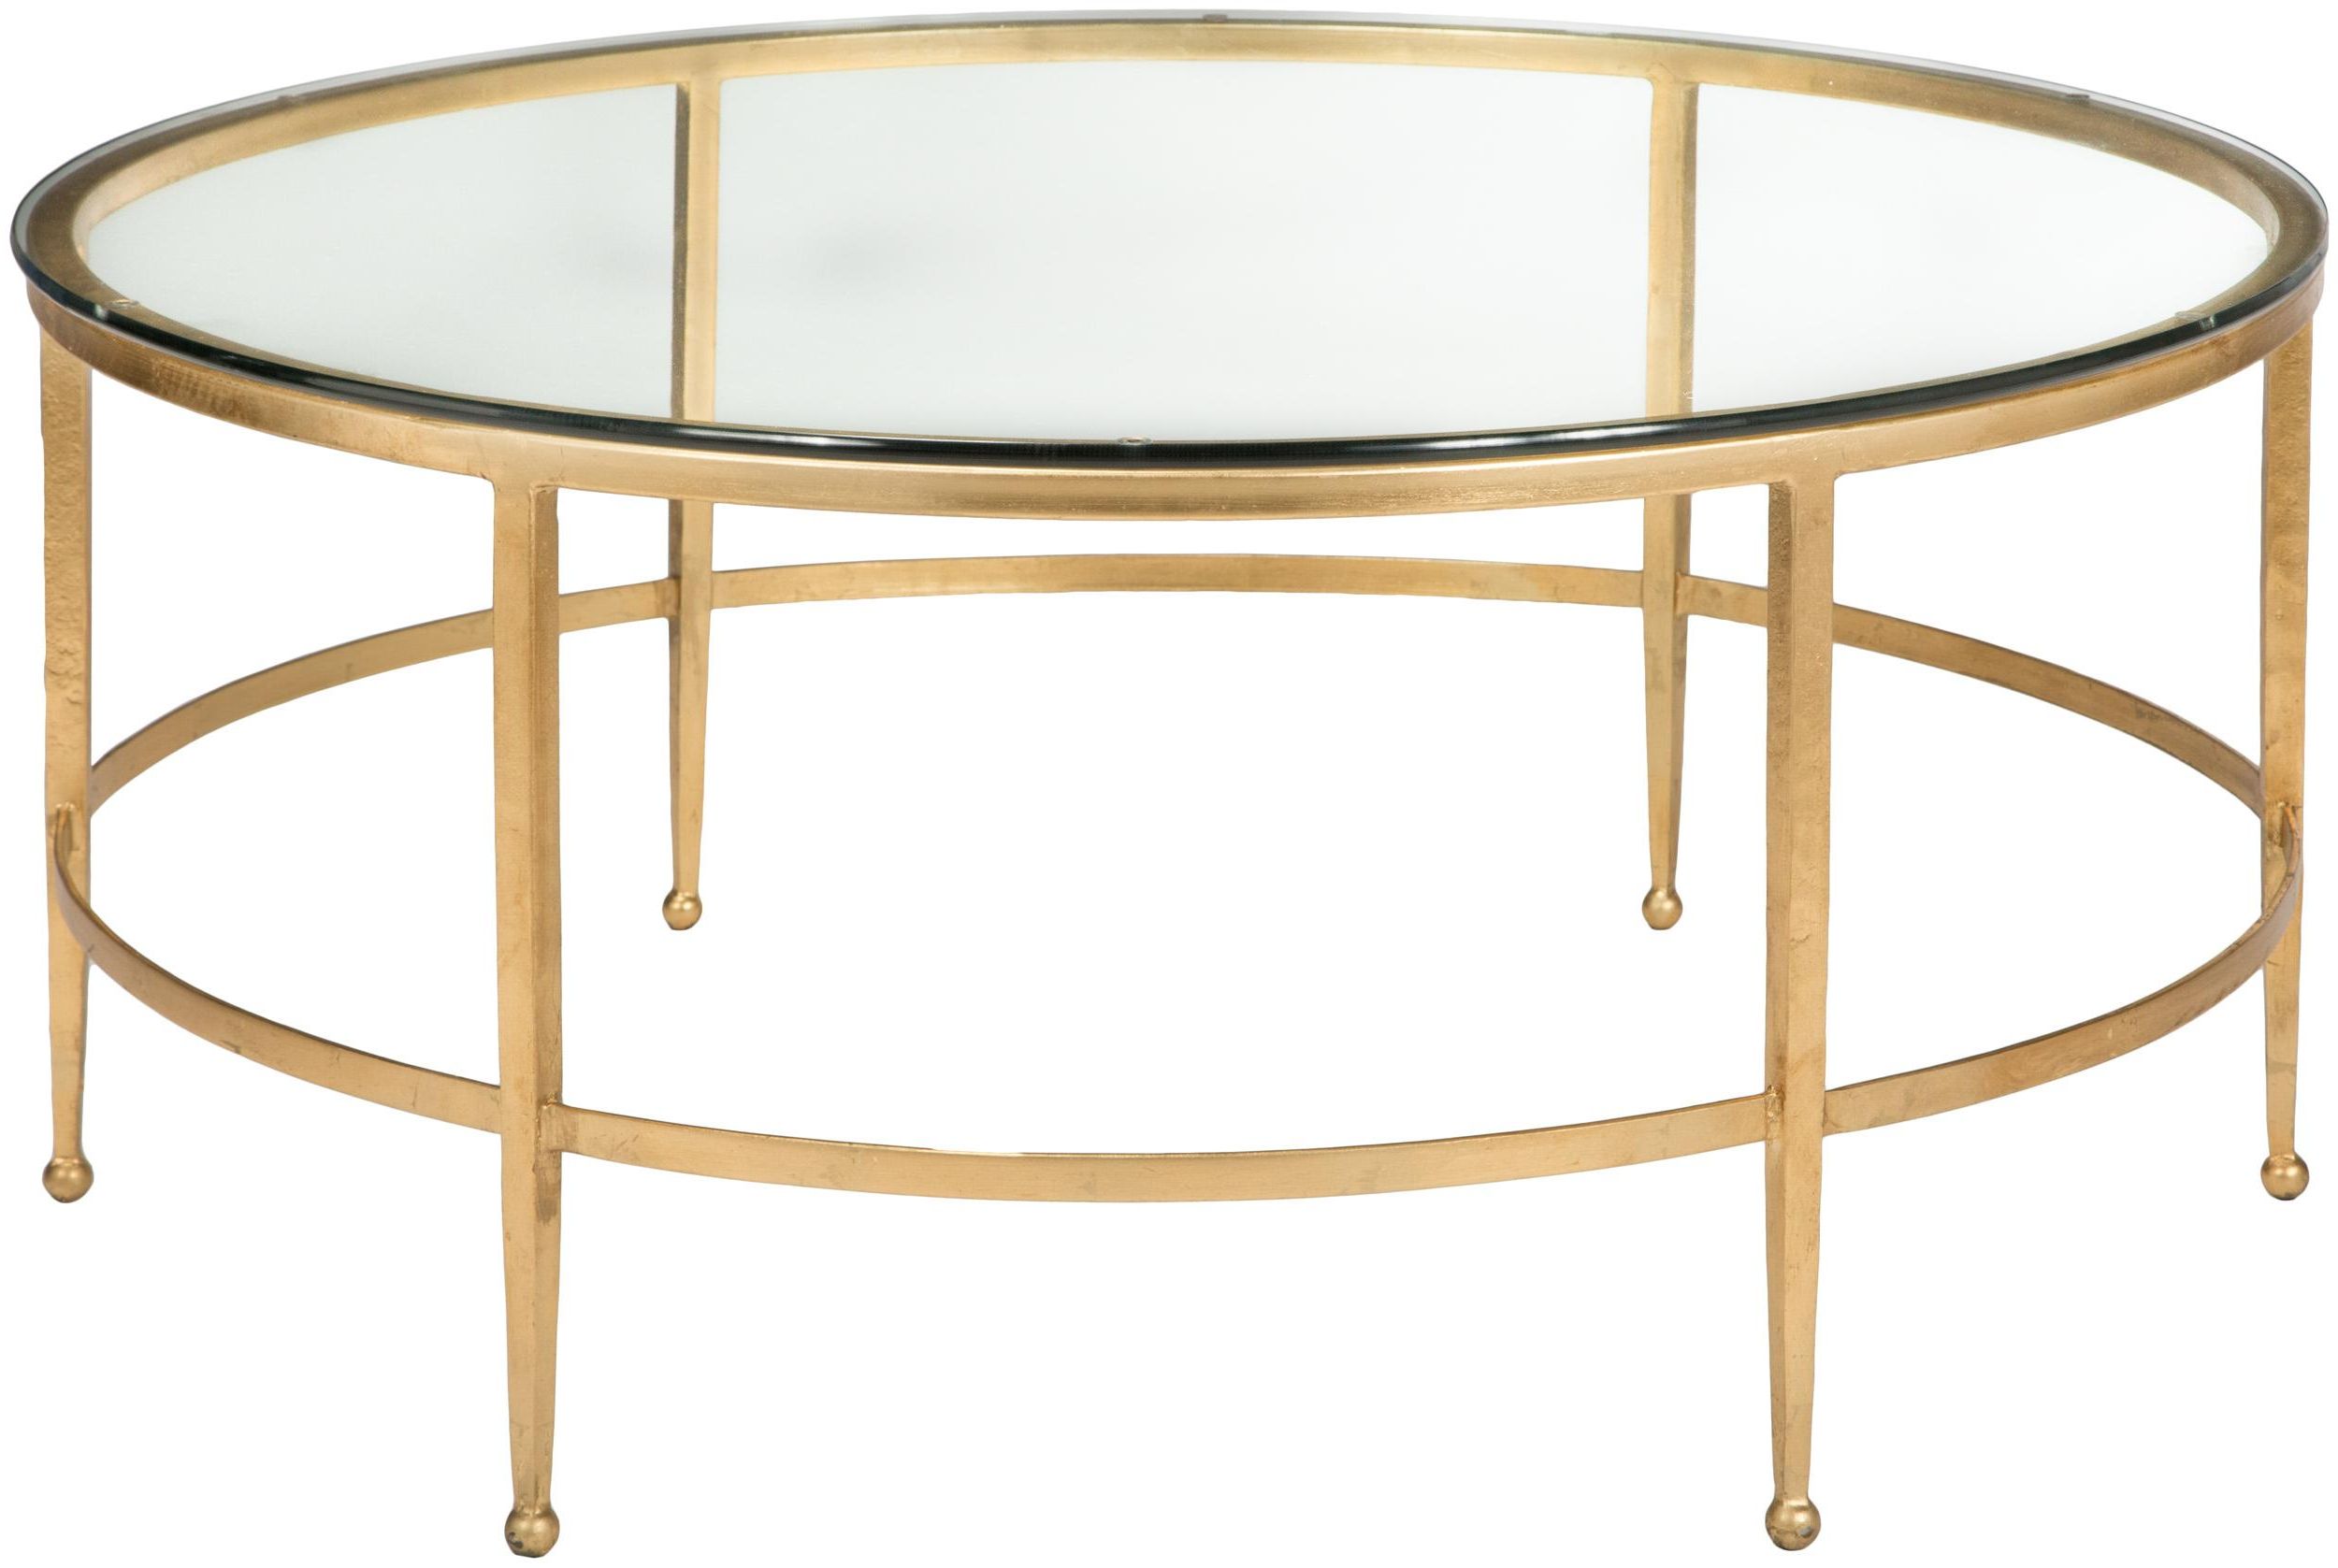 Widely Used Glass And Gold Coffee Tables With Regard To Safavieh Couture (View 14 of 20)